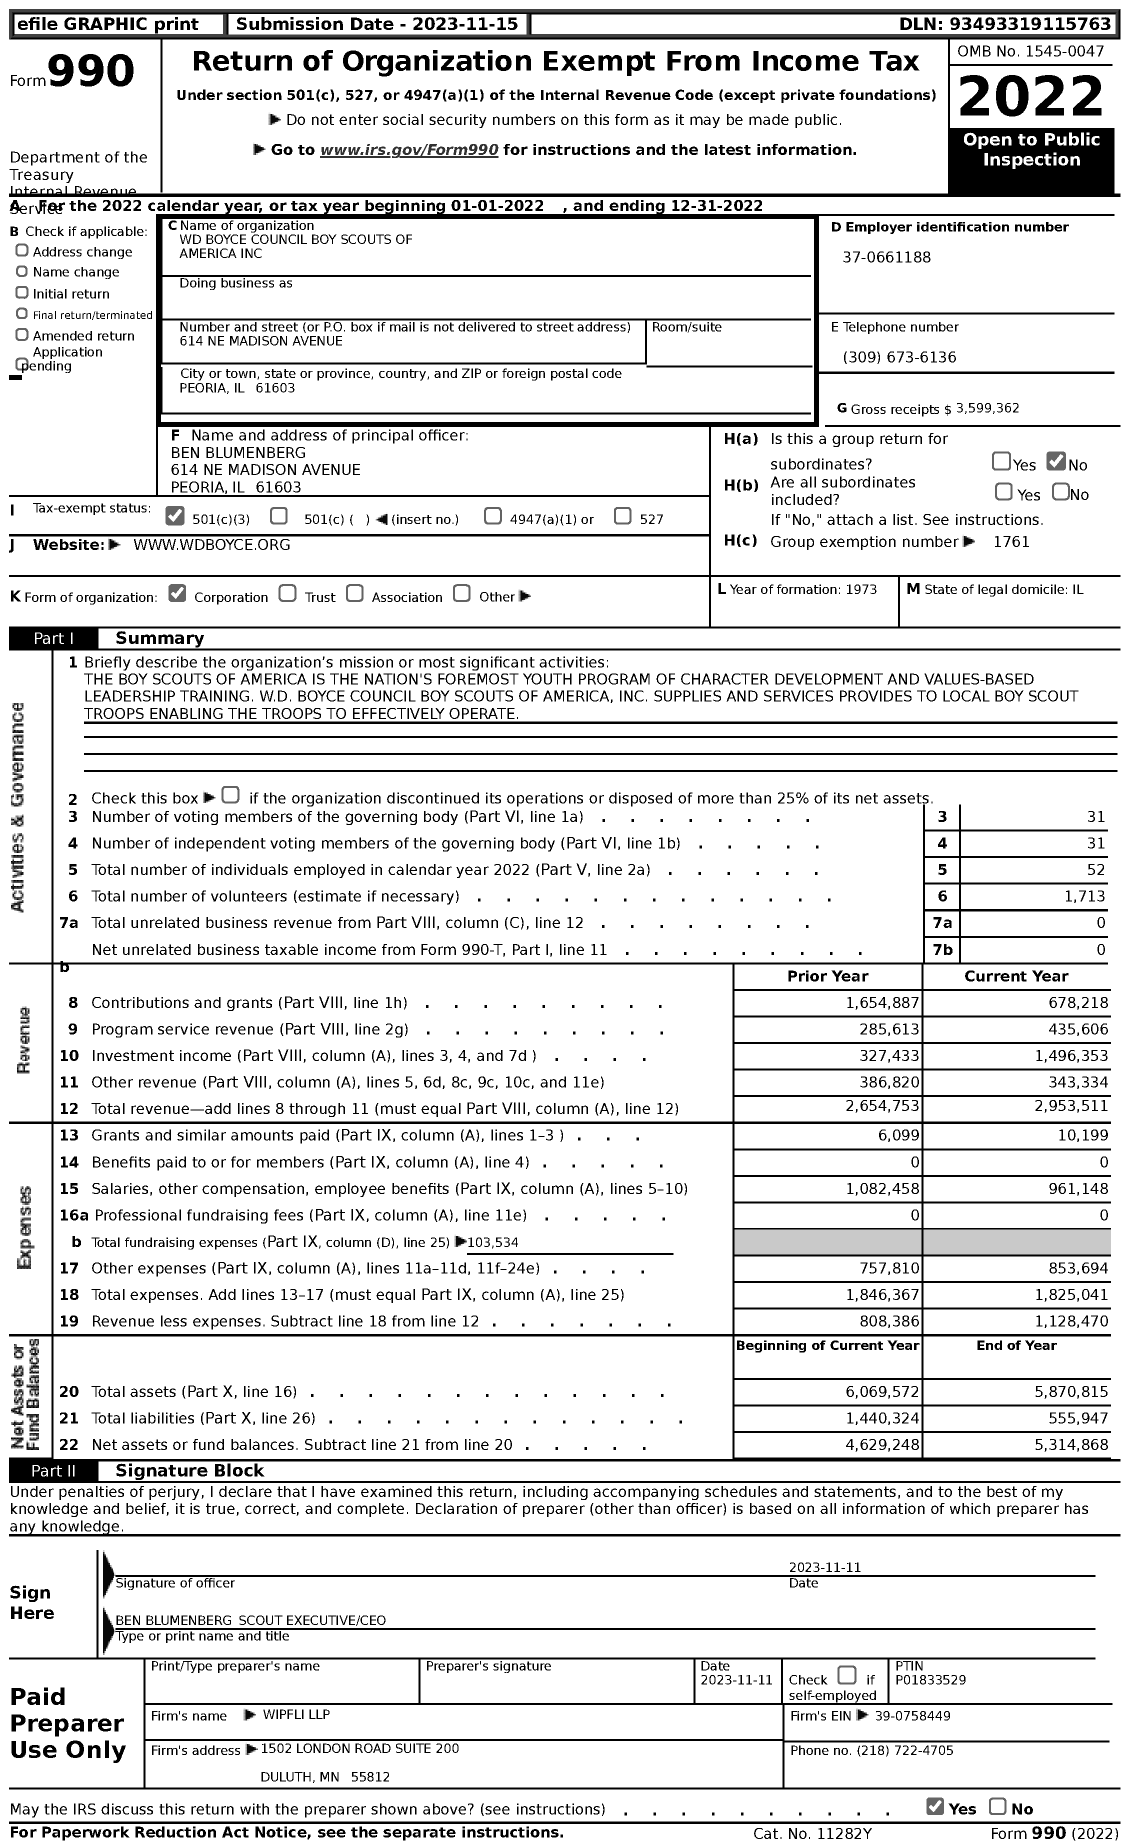 Image of first page of 2022 Form 990 for Boy Scouts of America - 138 W D Boyce Council